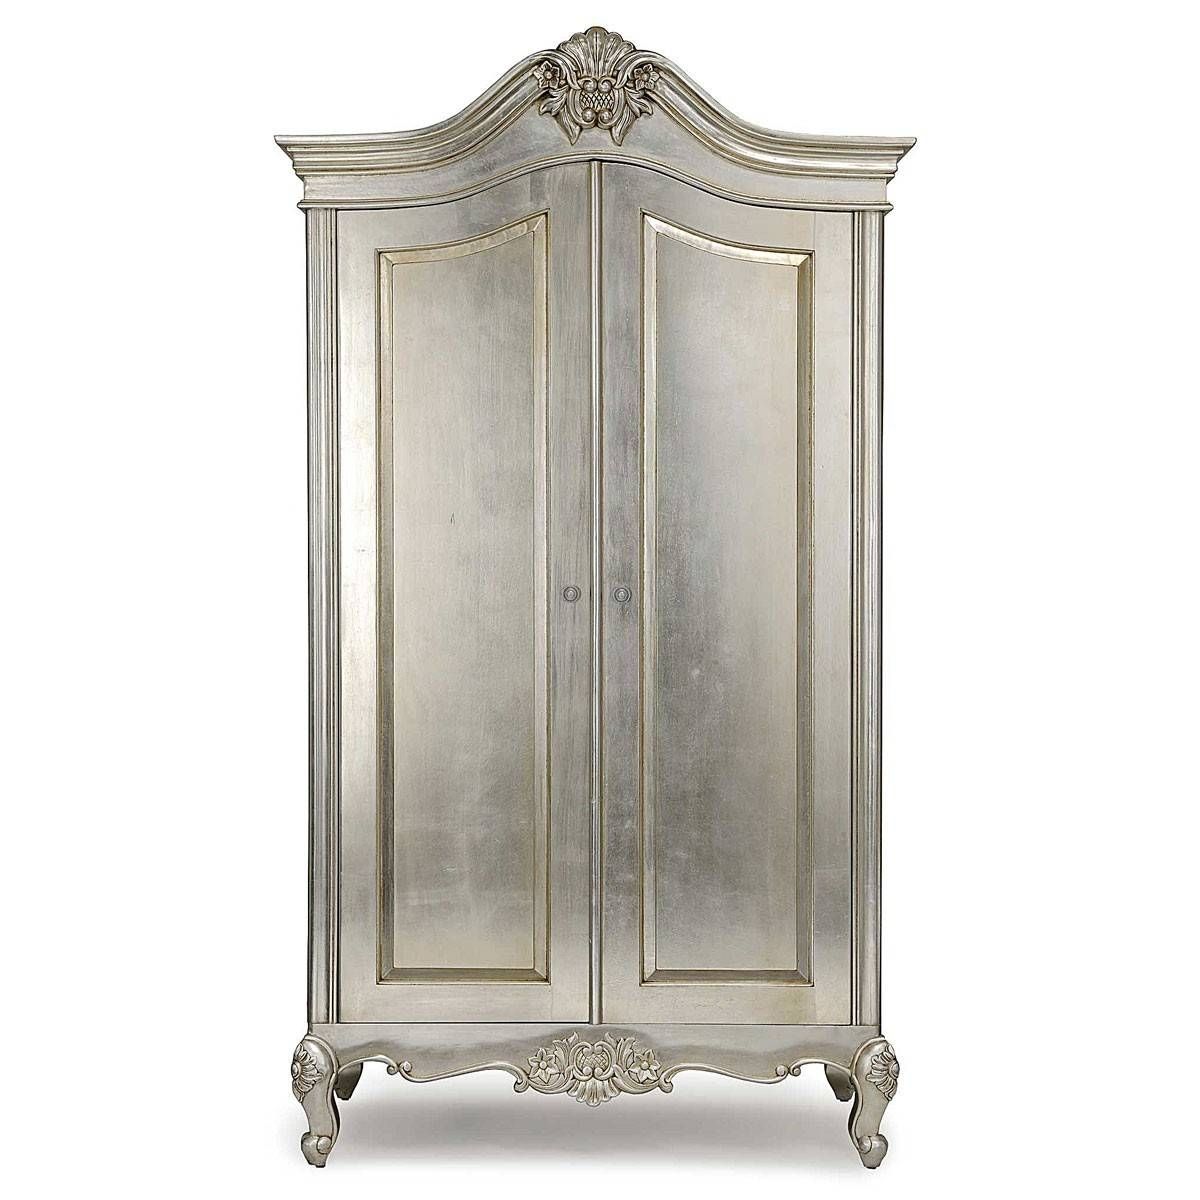 Tiffany Silver French Mirrored Armoire | French Bedroom Furniture Inside Silver French Wardrobes (View 2 of 15)